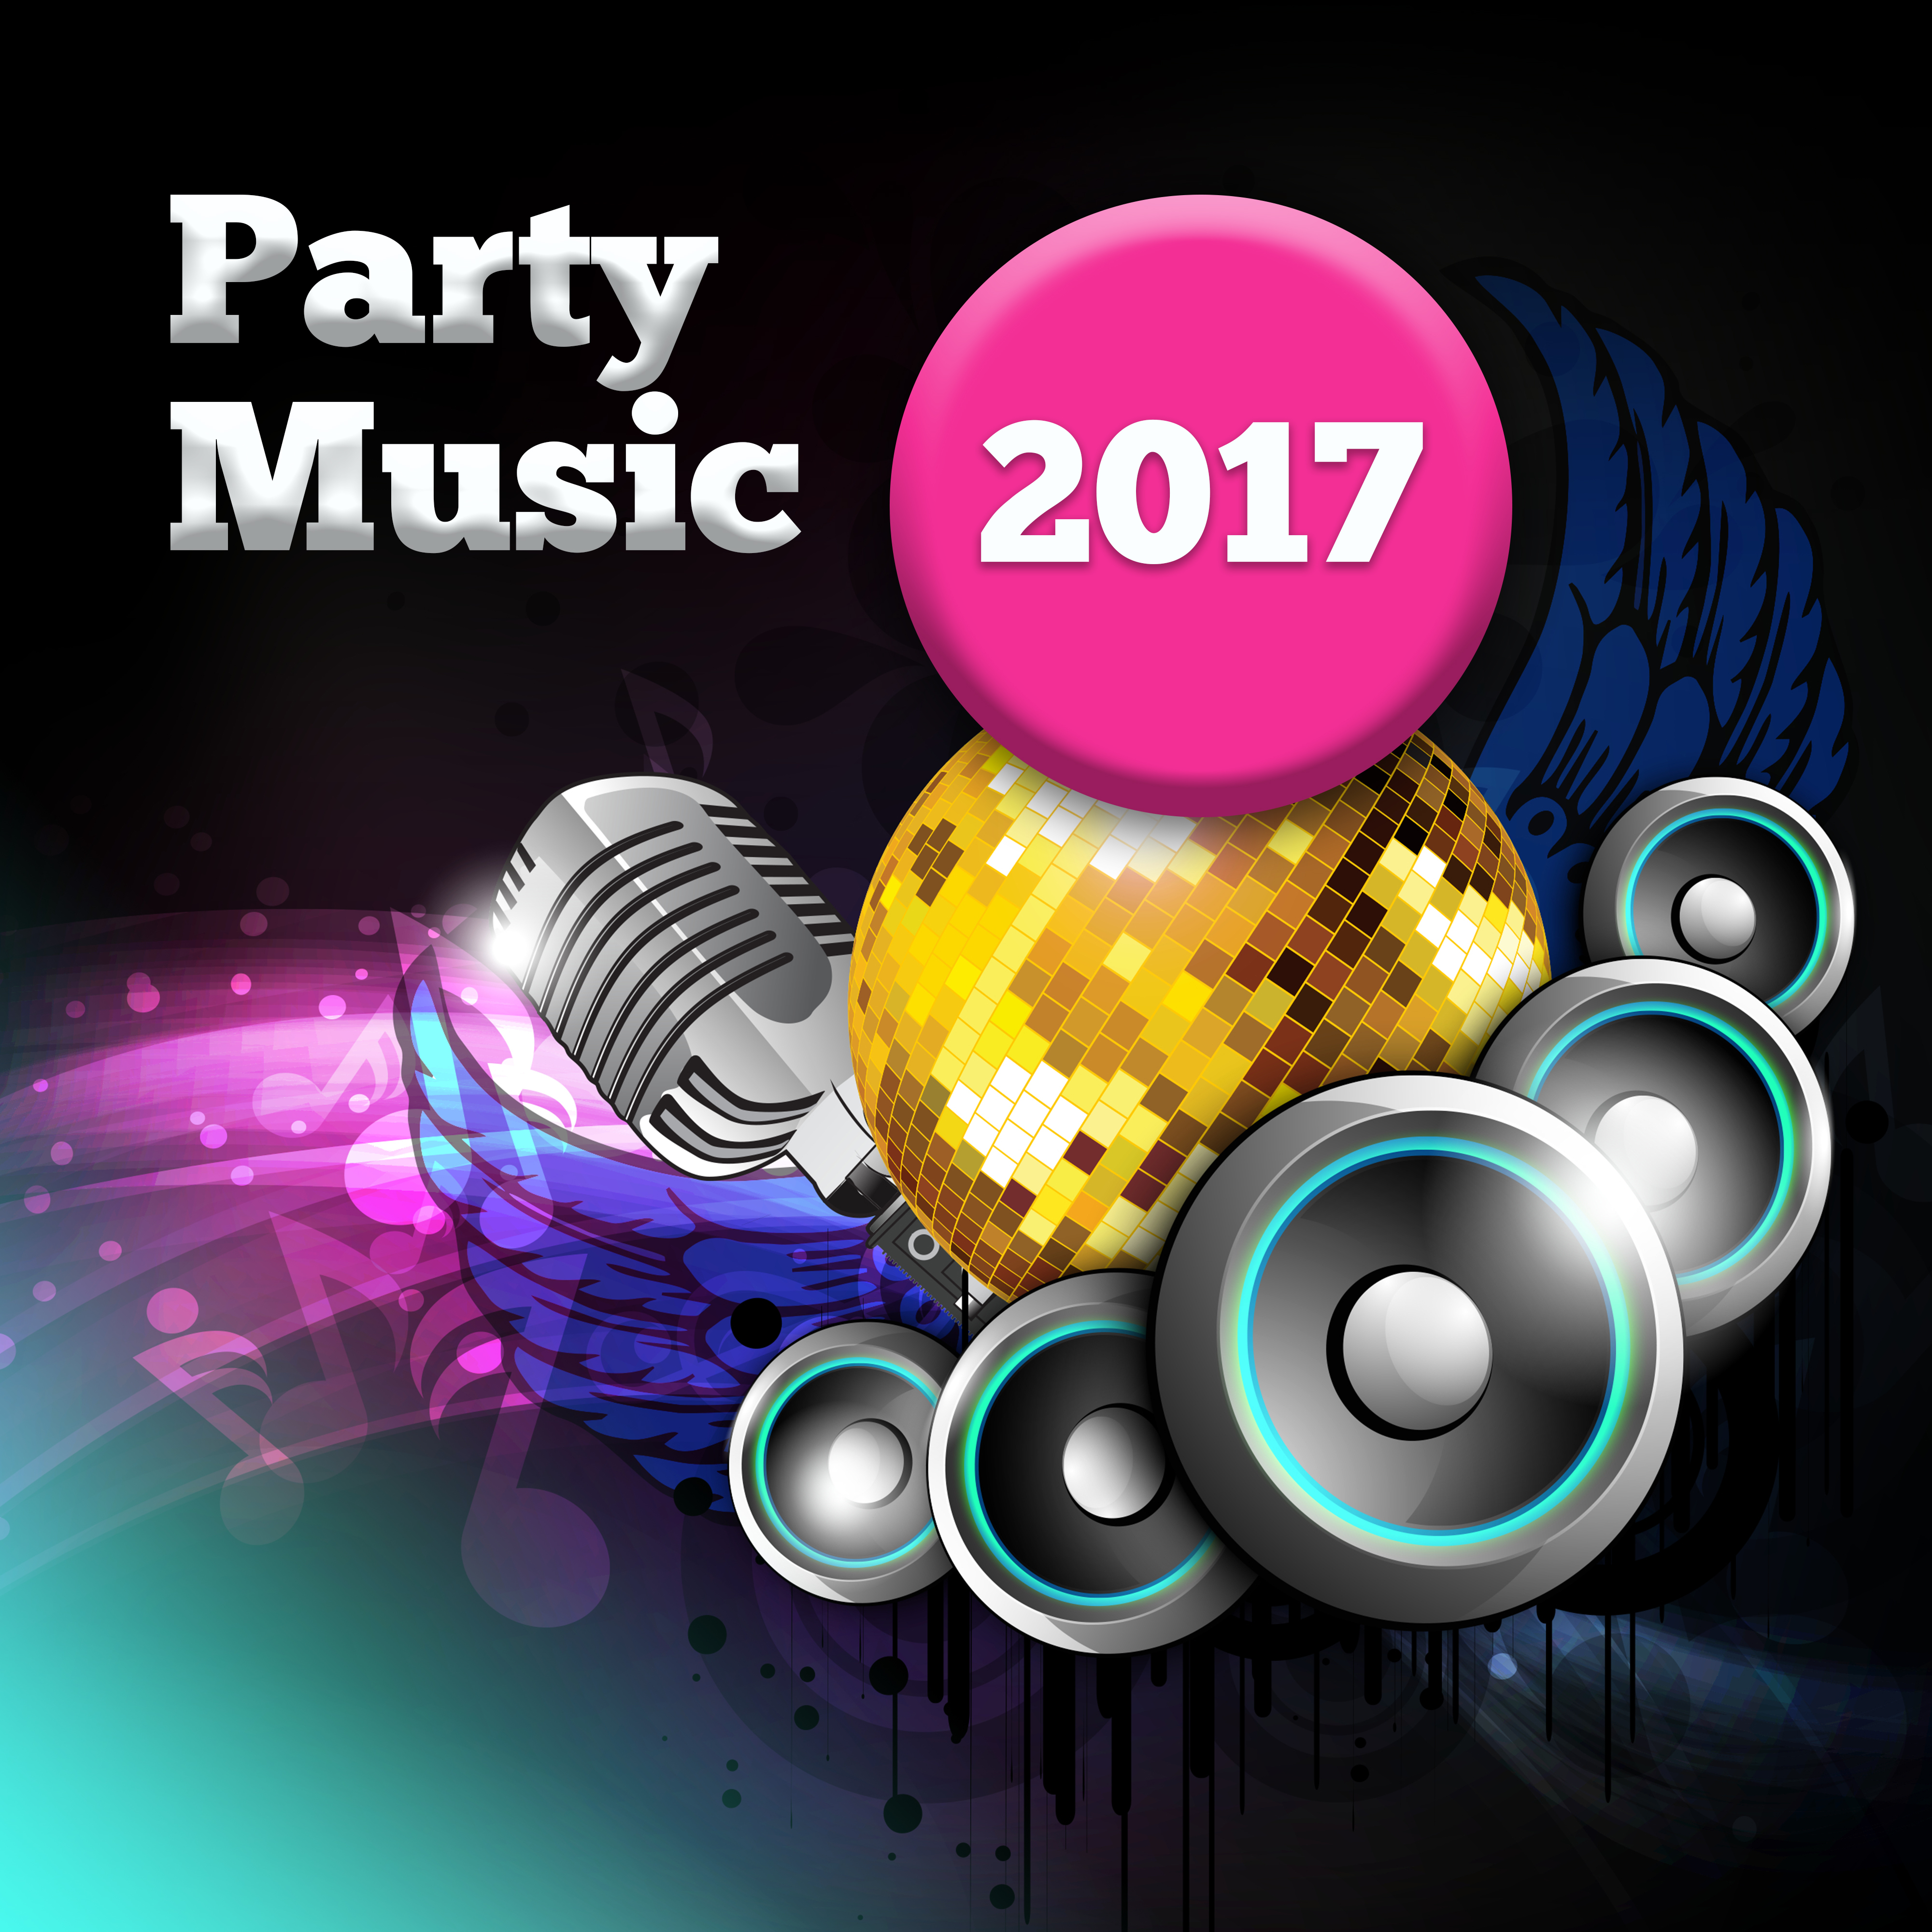 Party Music 2017  Chill Out Music, Dance, Party Hits, Summer 2017, Ibiza, Lounge, 69 Party